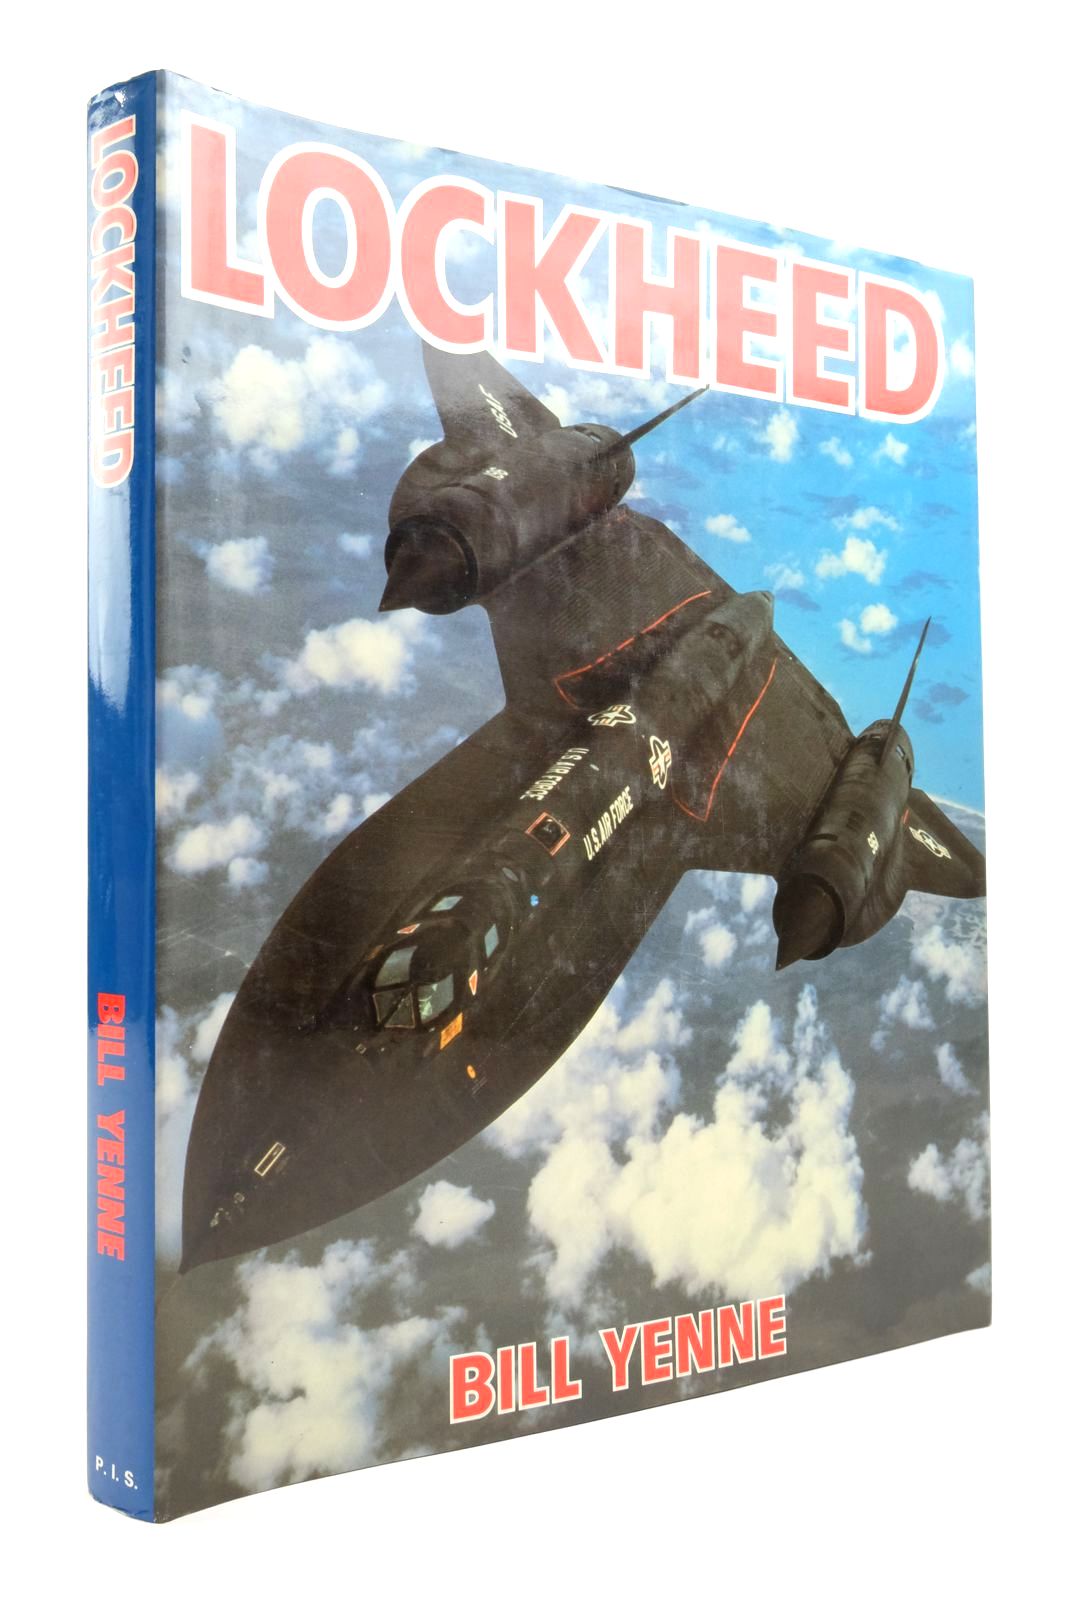 Photo of LOCKHEED written by Yenne, Bill published by Bison Books (STOCK CODE: 2138464)  for sale by Stella & Rose's Books